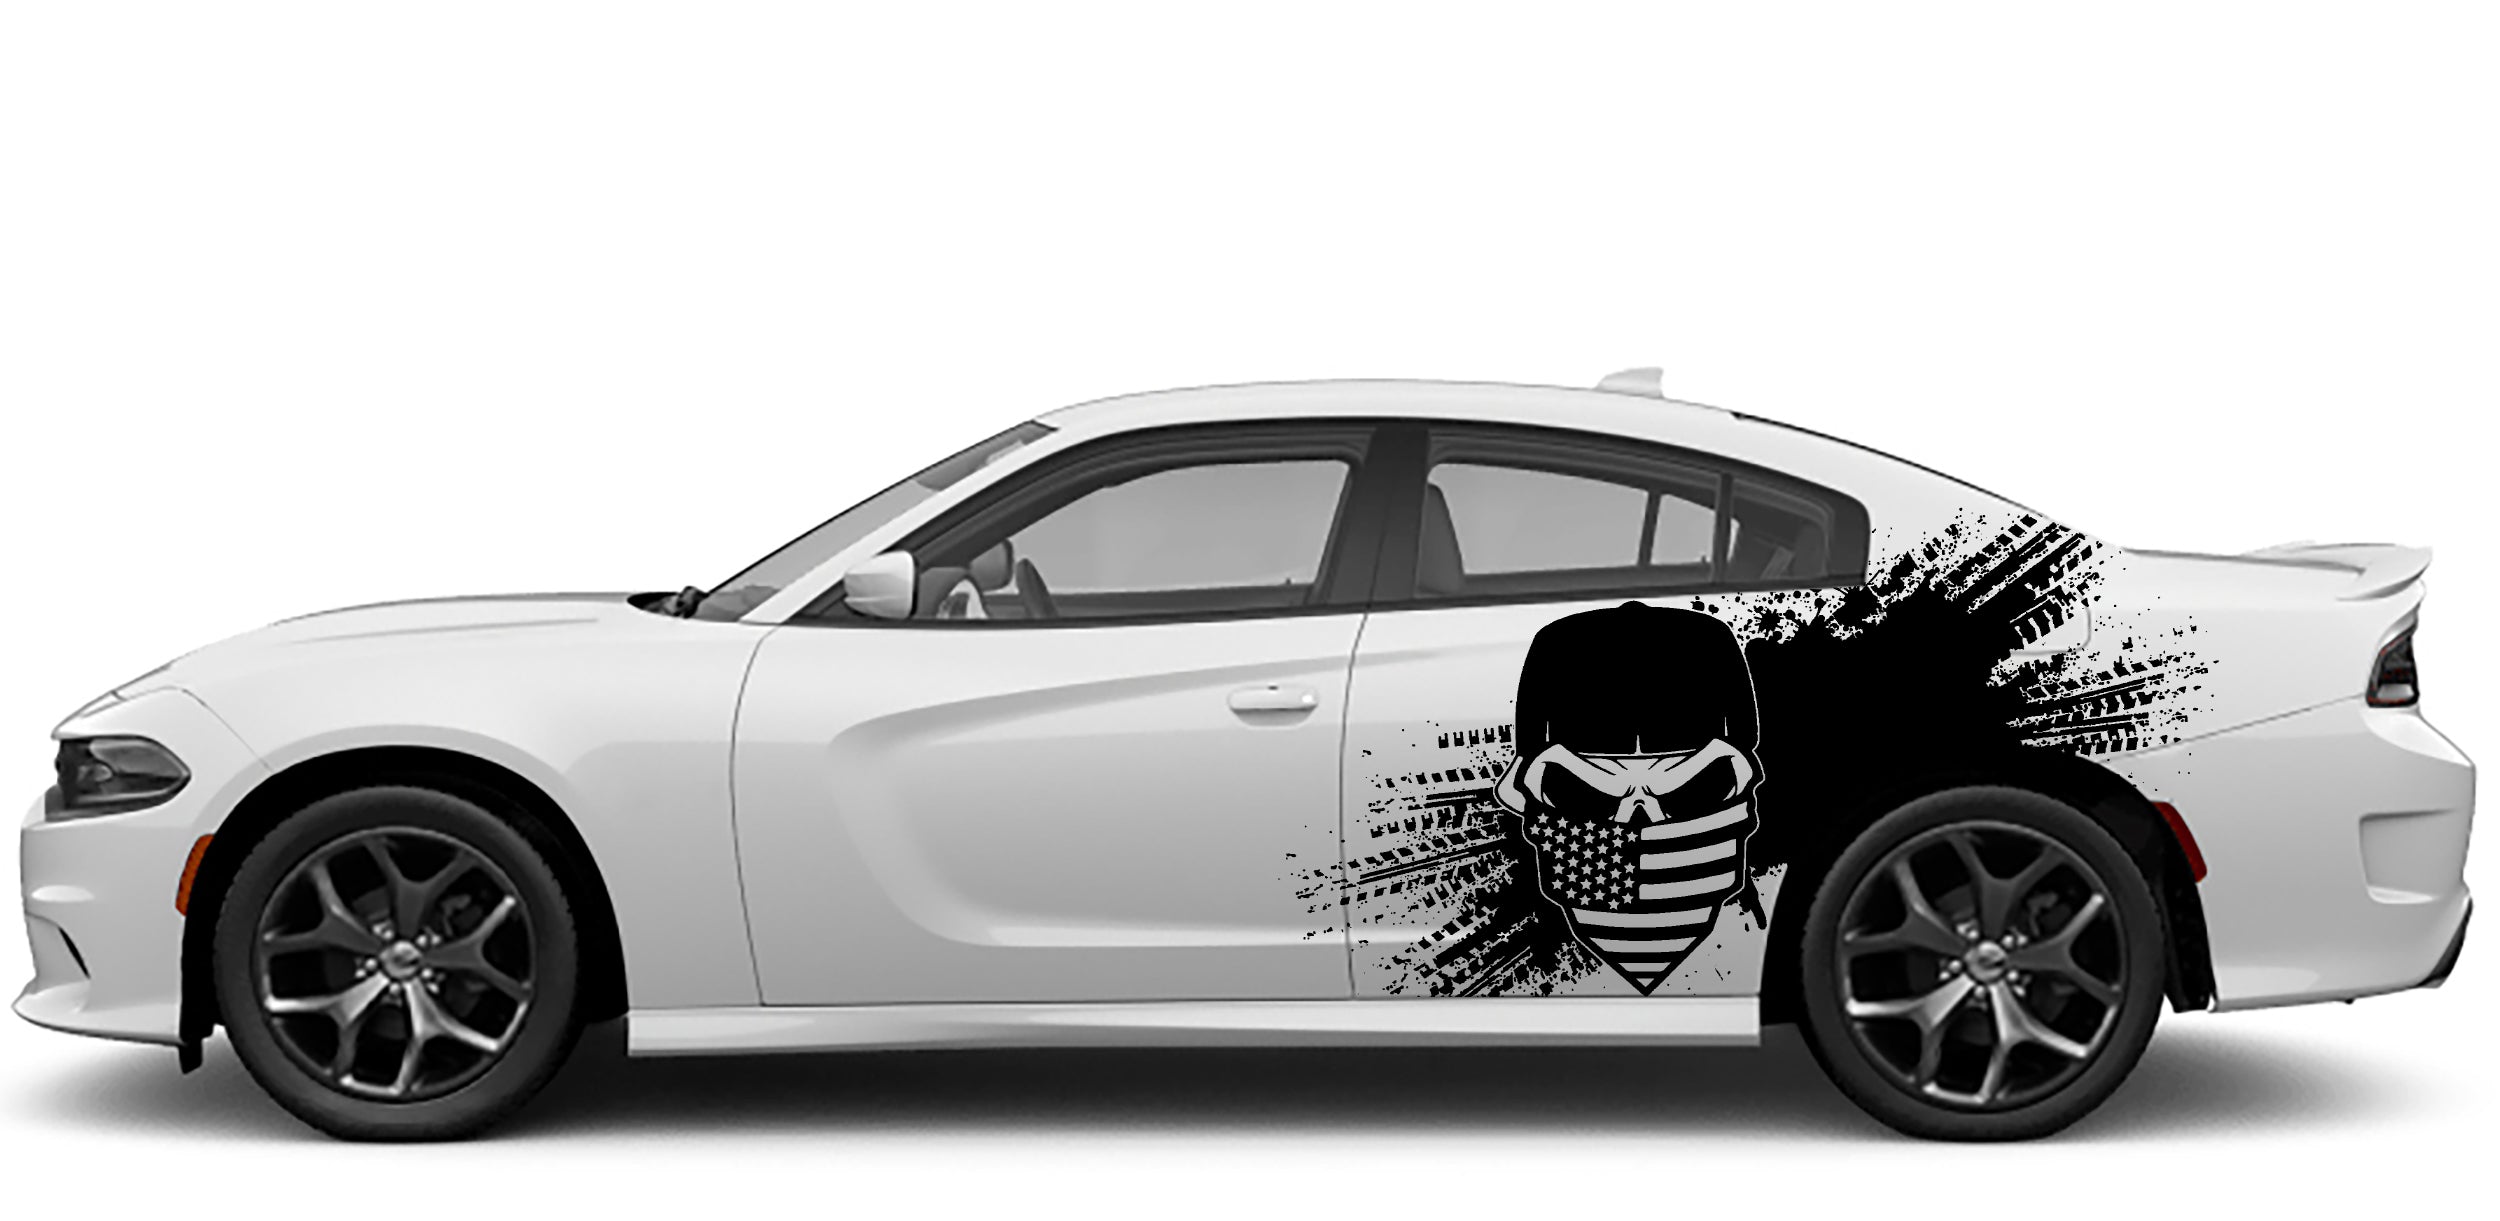 Dodge Charger Bandana Skull Side Decals (Pair) : Vinyl Graphics Kit Fits (2015-2023)